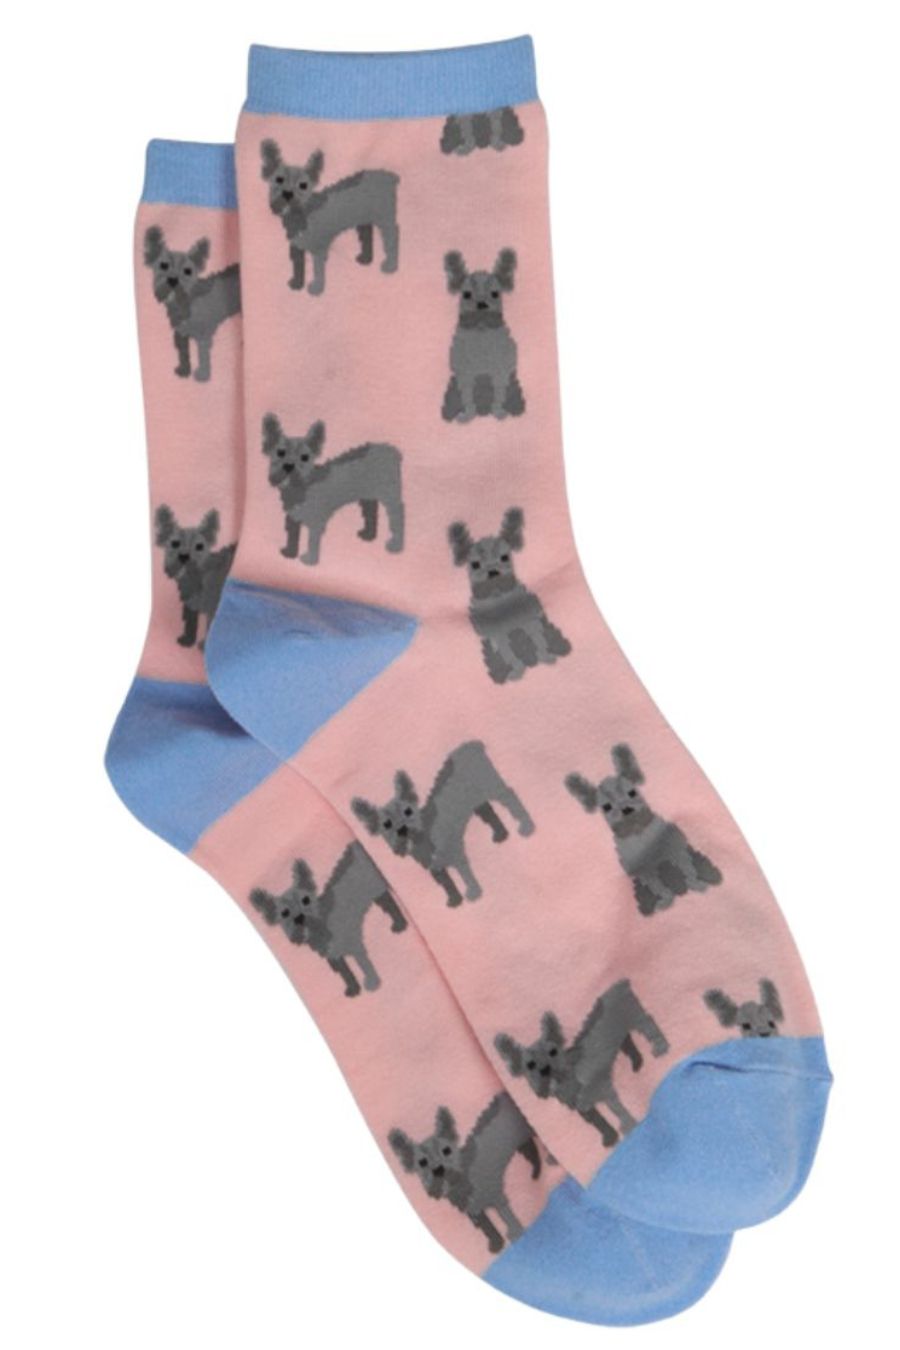 pink and blue ankle socks with french bulldogs on them